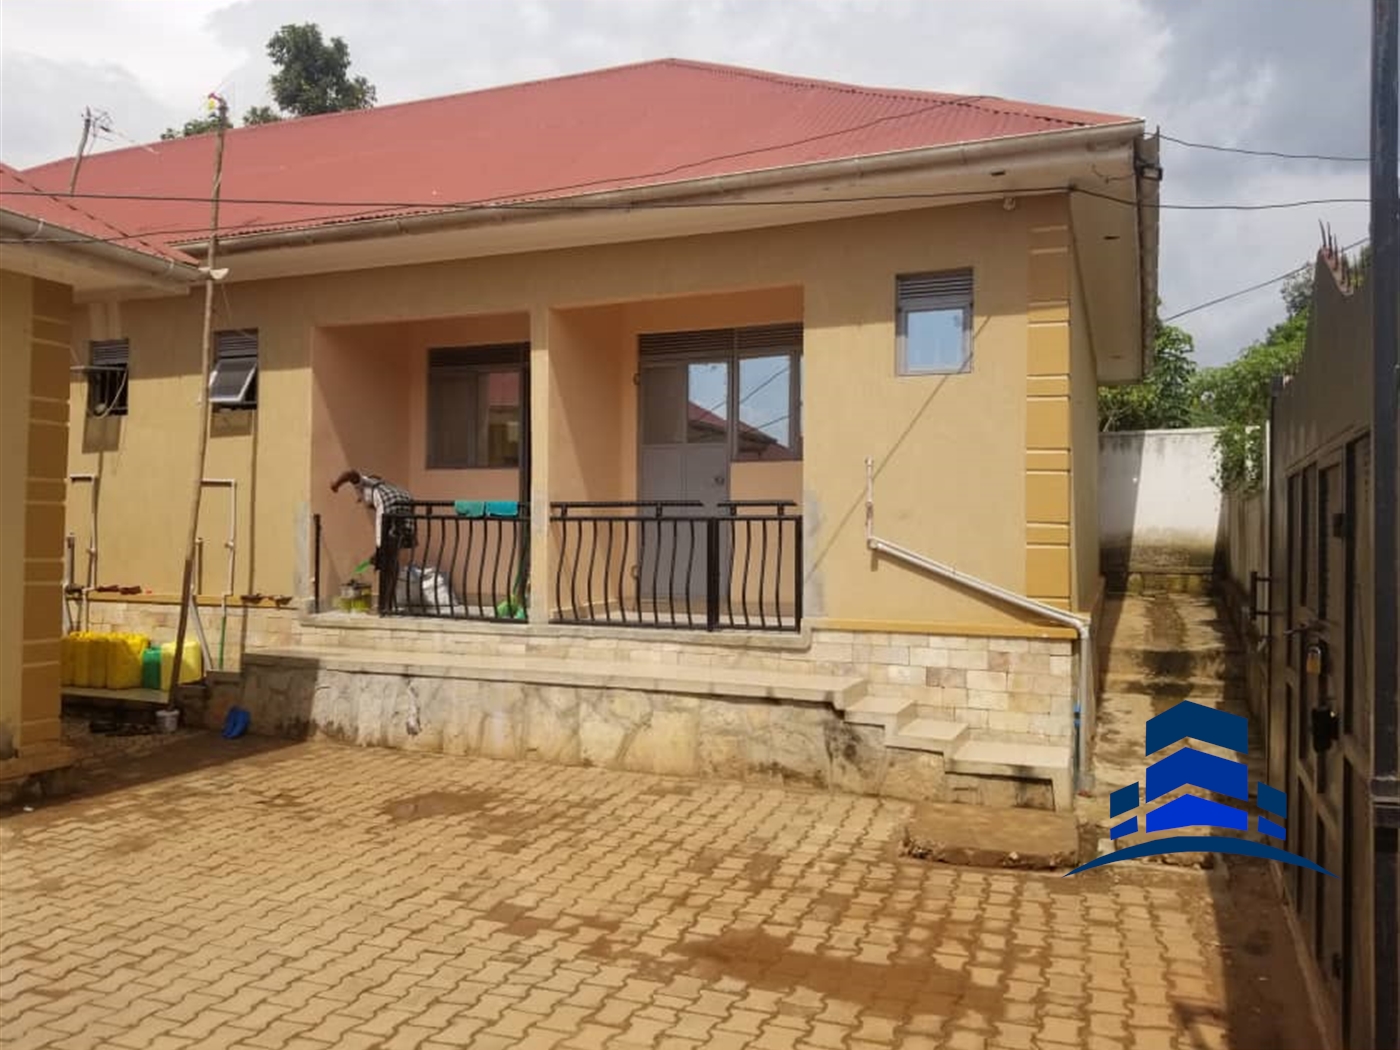 Rental units for sale in Nsuube Mukono